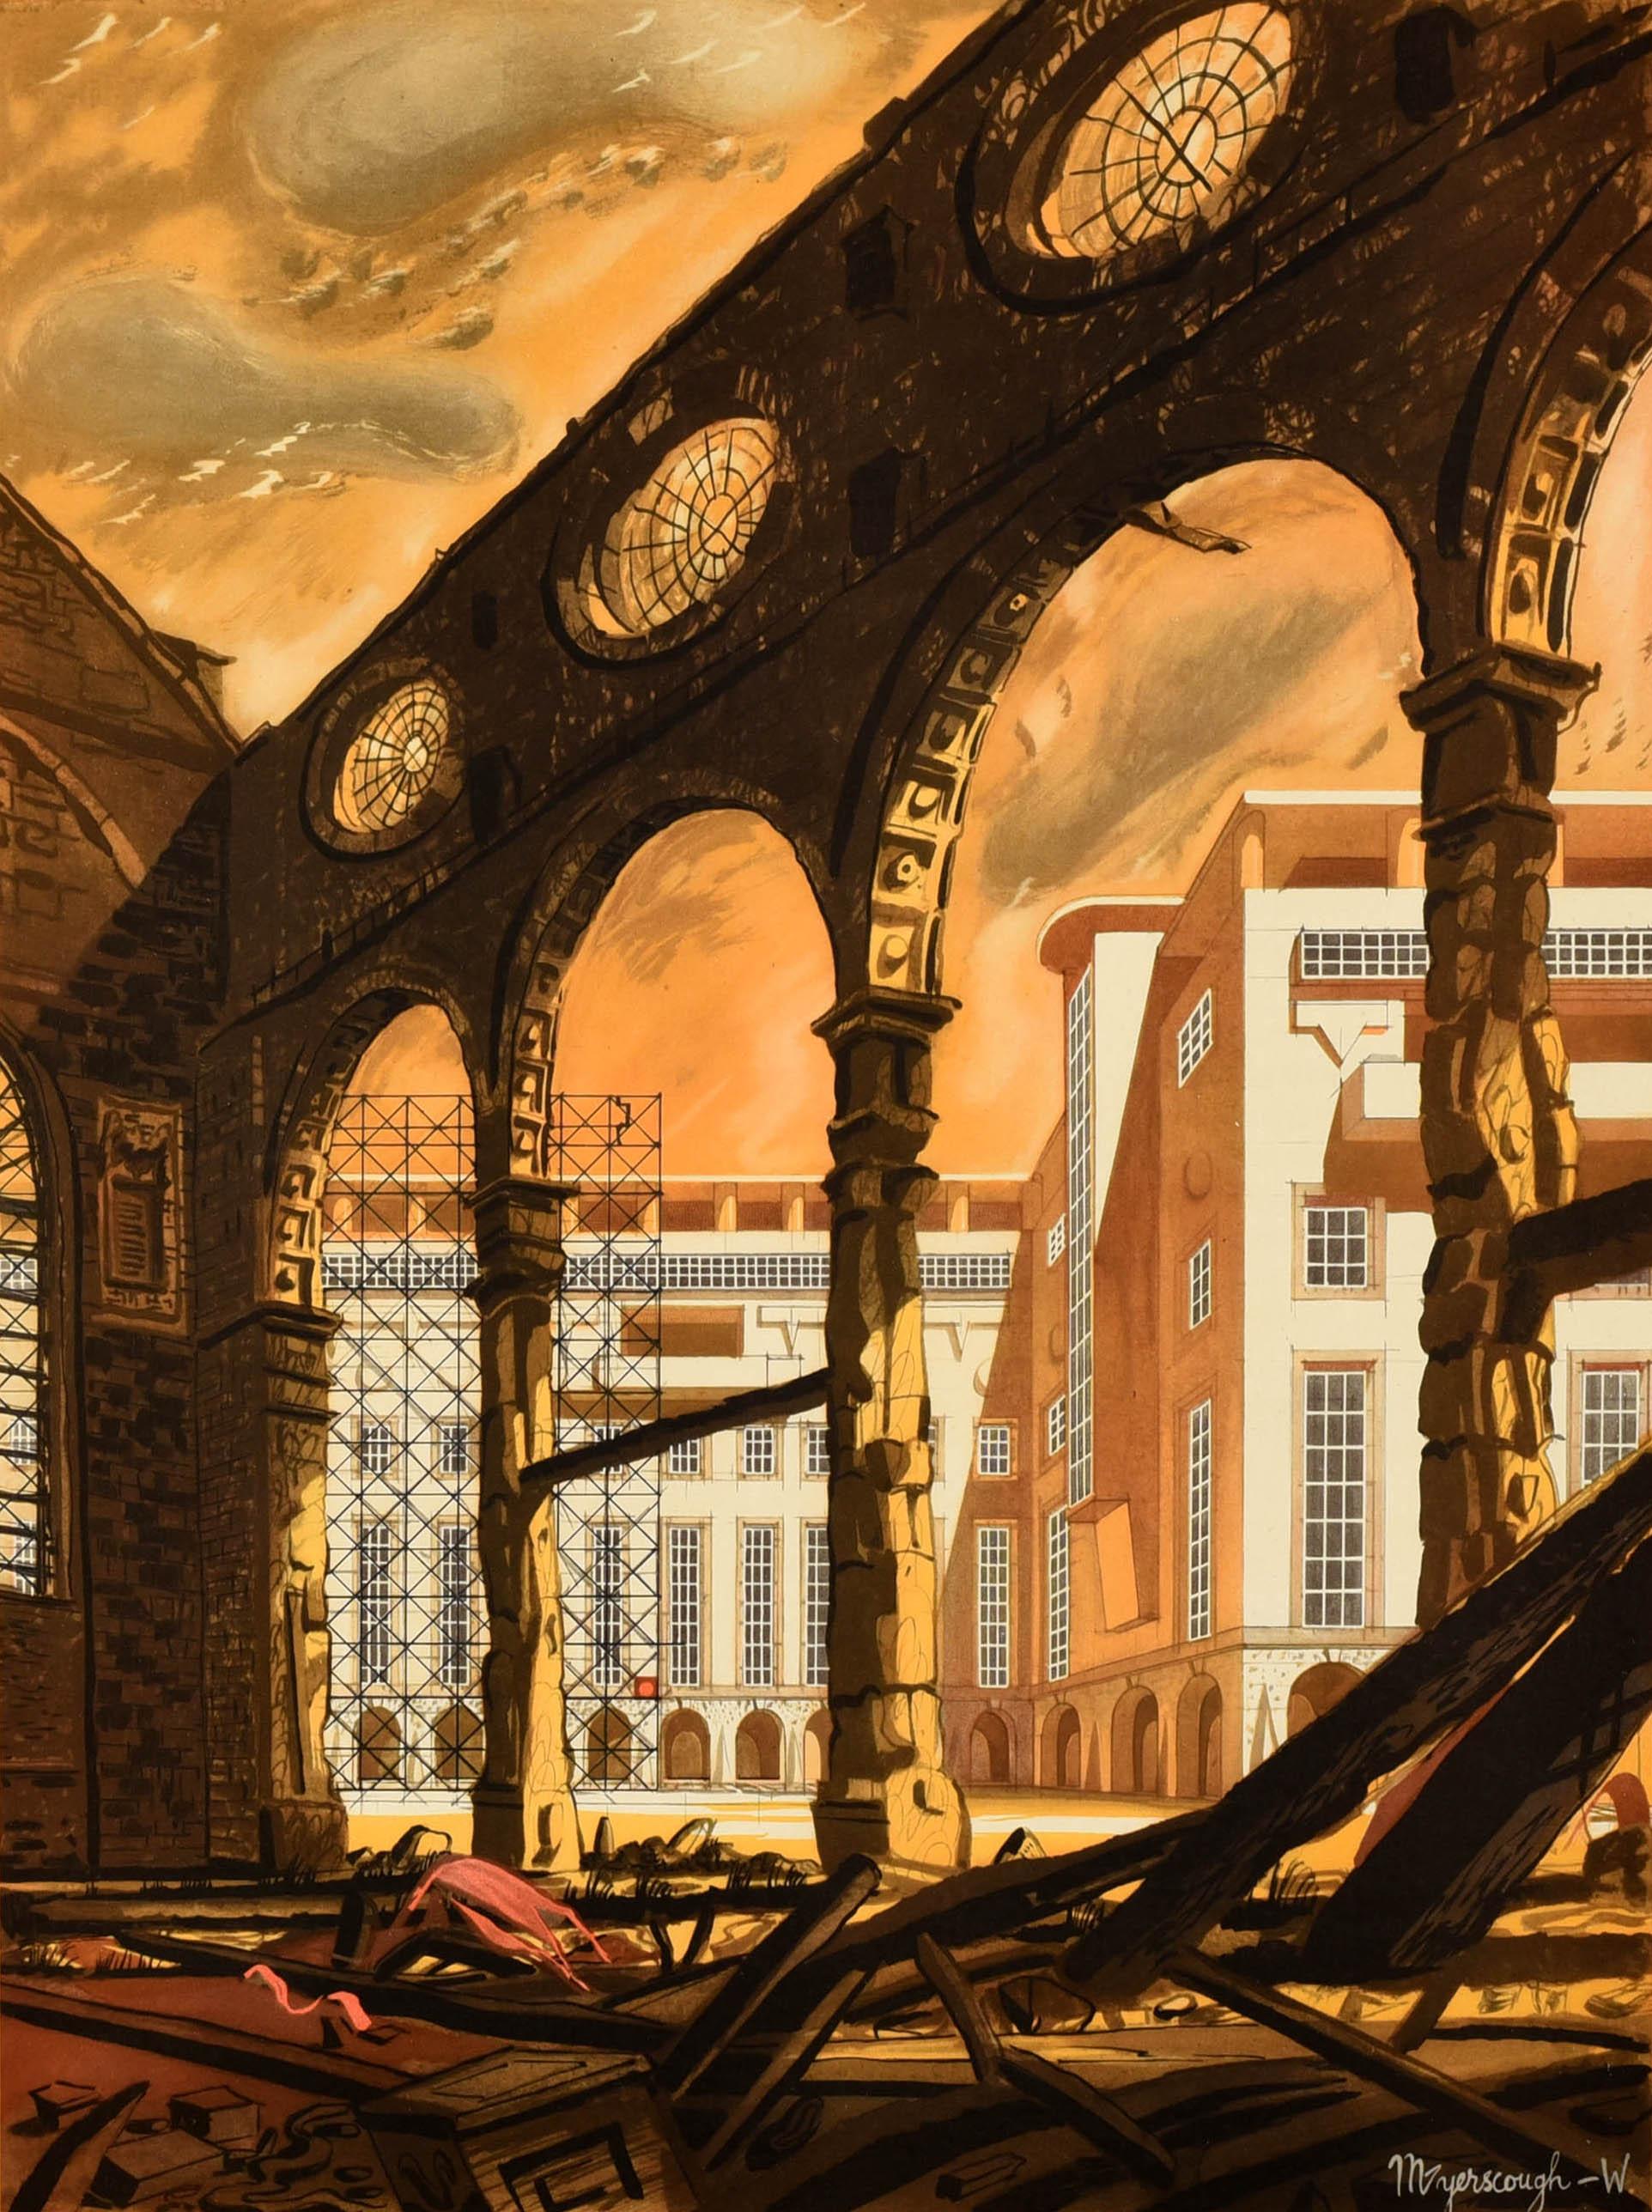 Original vintage World War Two poster - To Build for Prosperity ... Save Now - featuring an old church building in ruins with scaffolding and new buildings visible through the remaining pillars below a dramatic orange sky From an original by